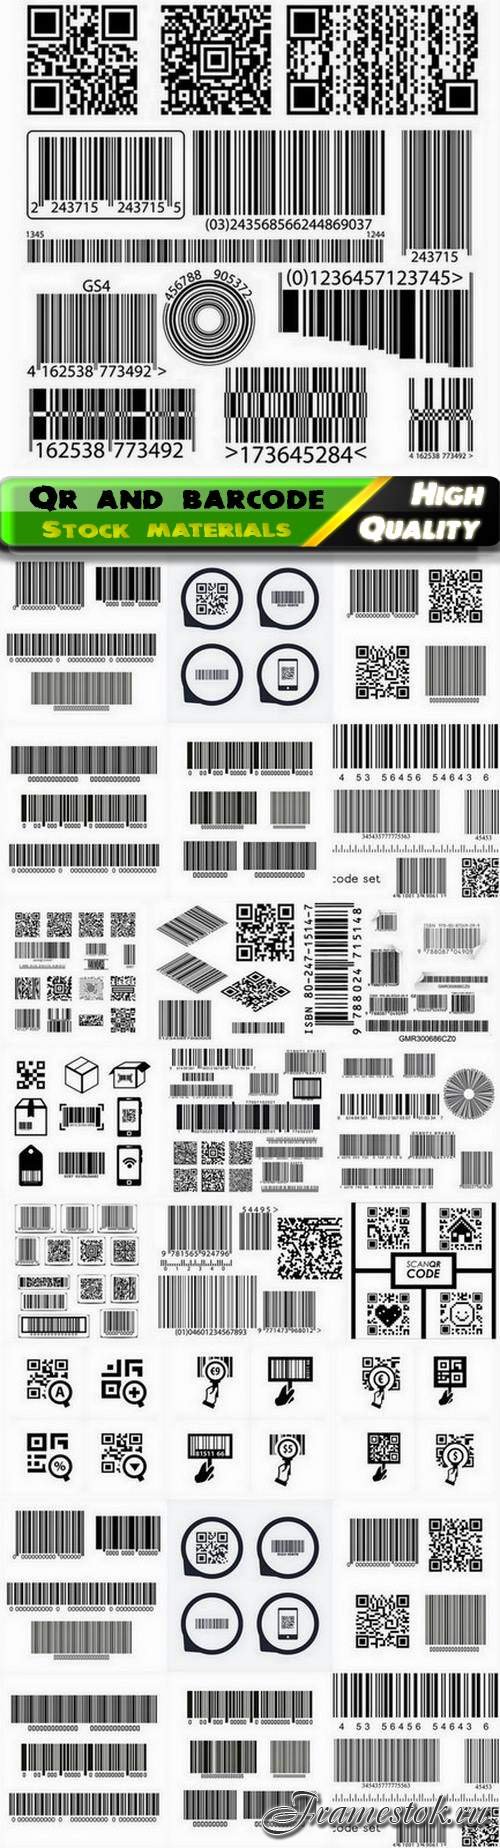 Qr and barcode for identify products in shop or supermarket - 25 Eps